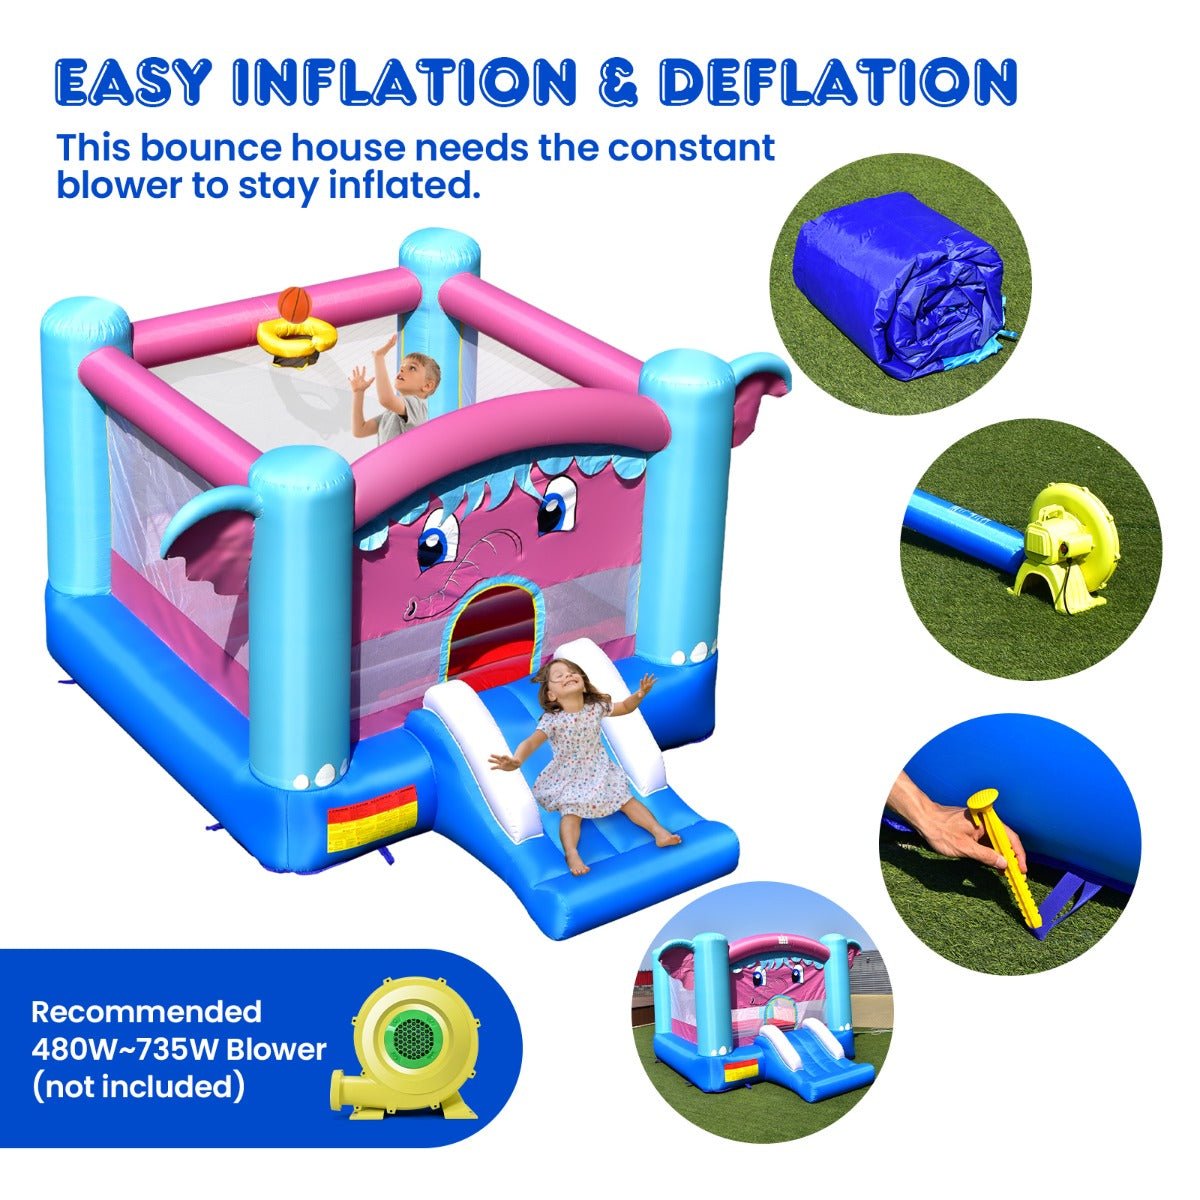 3-in-1 Inflatable Castle with Elephant Theme - Active Play for Children